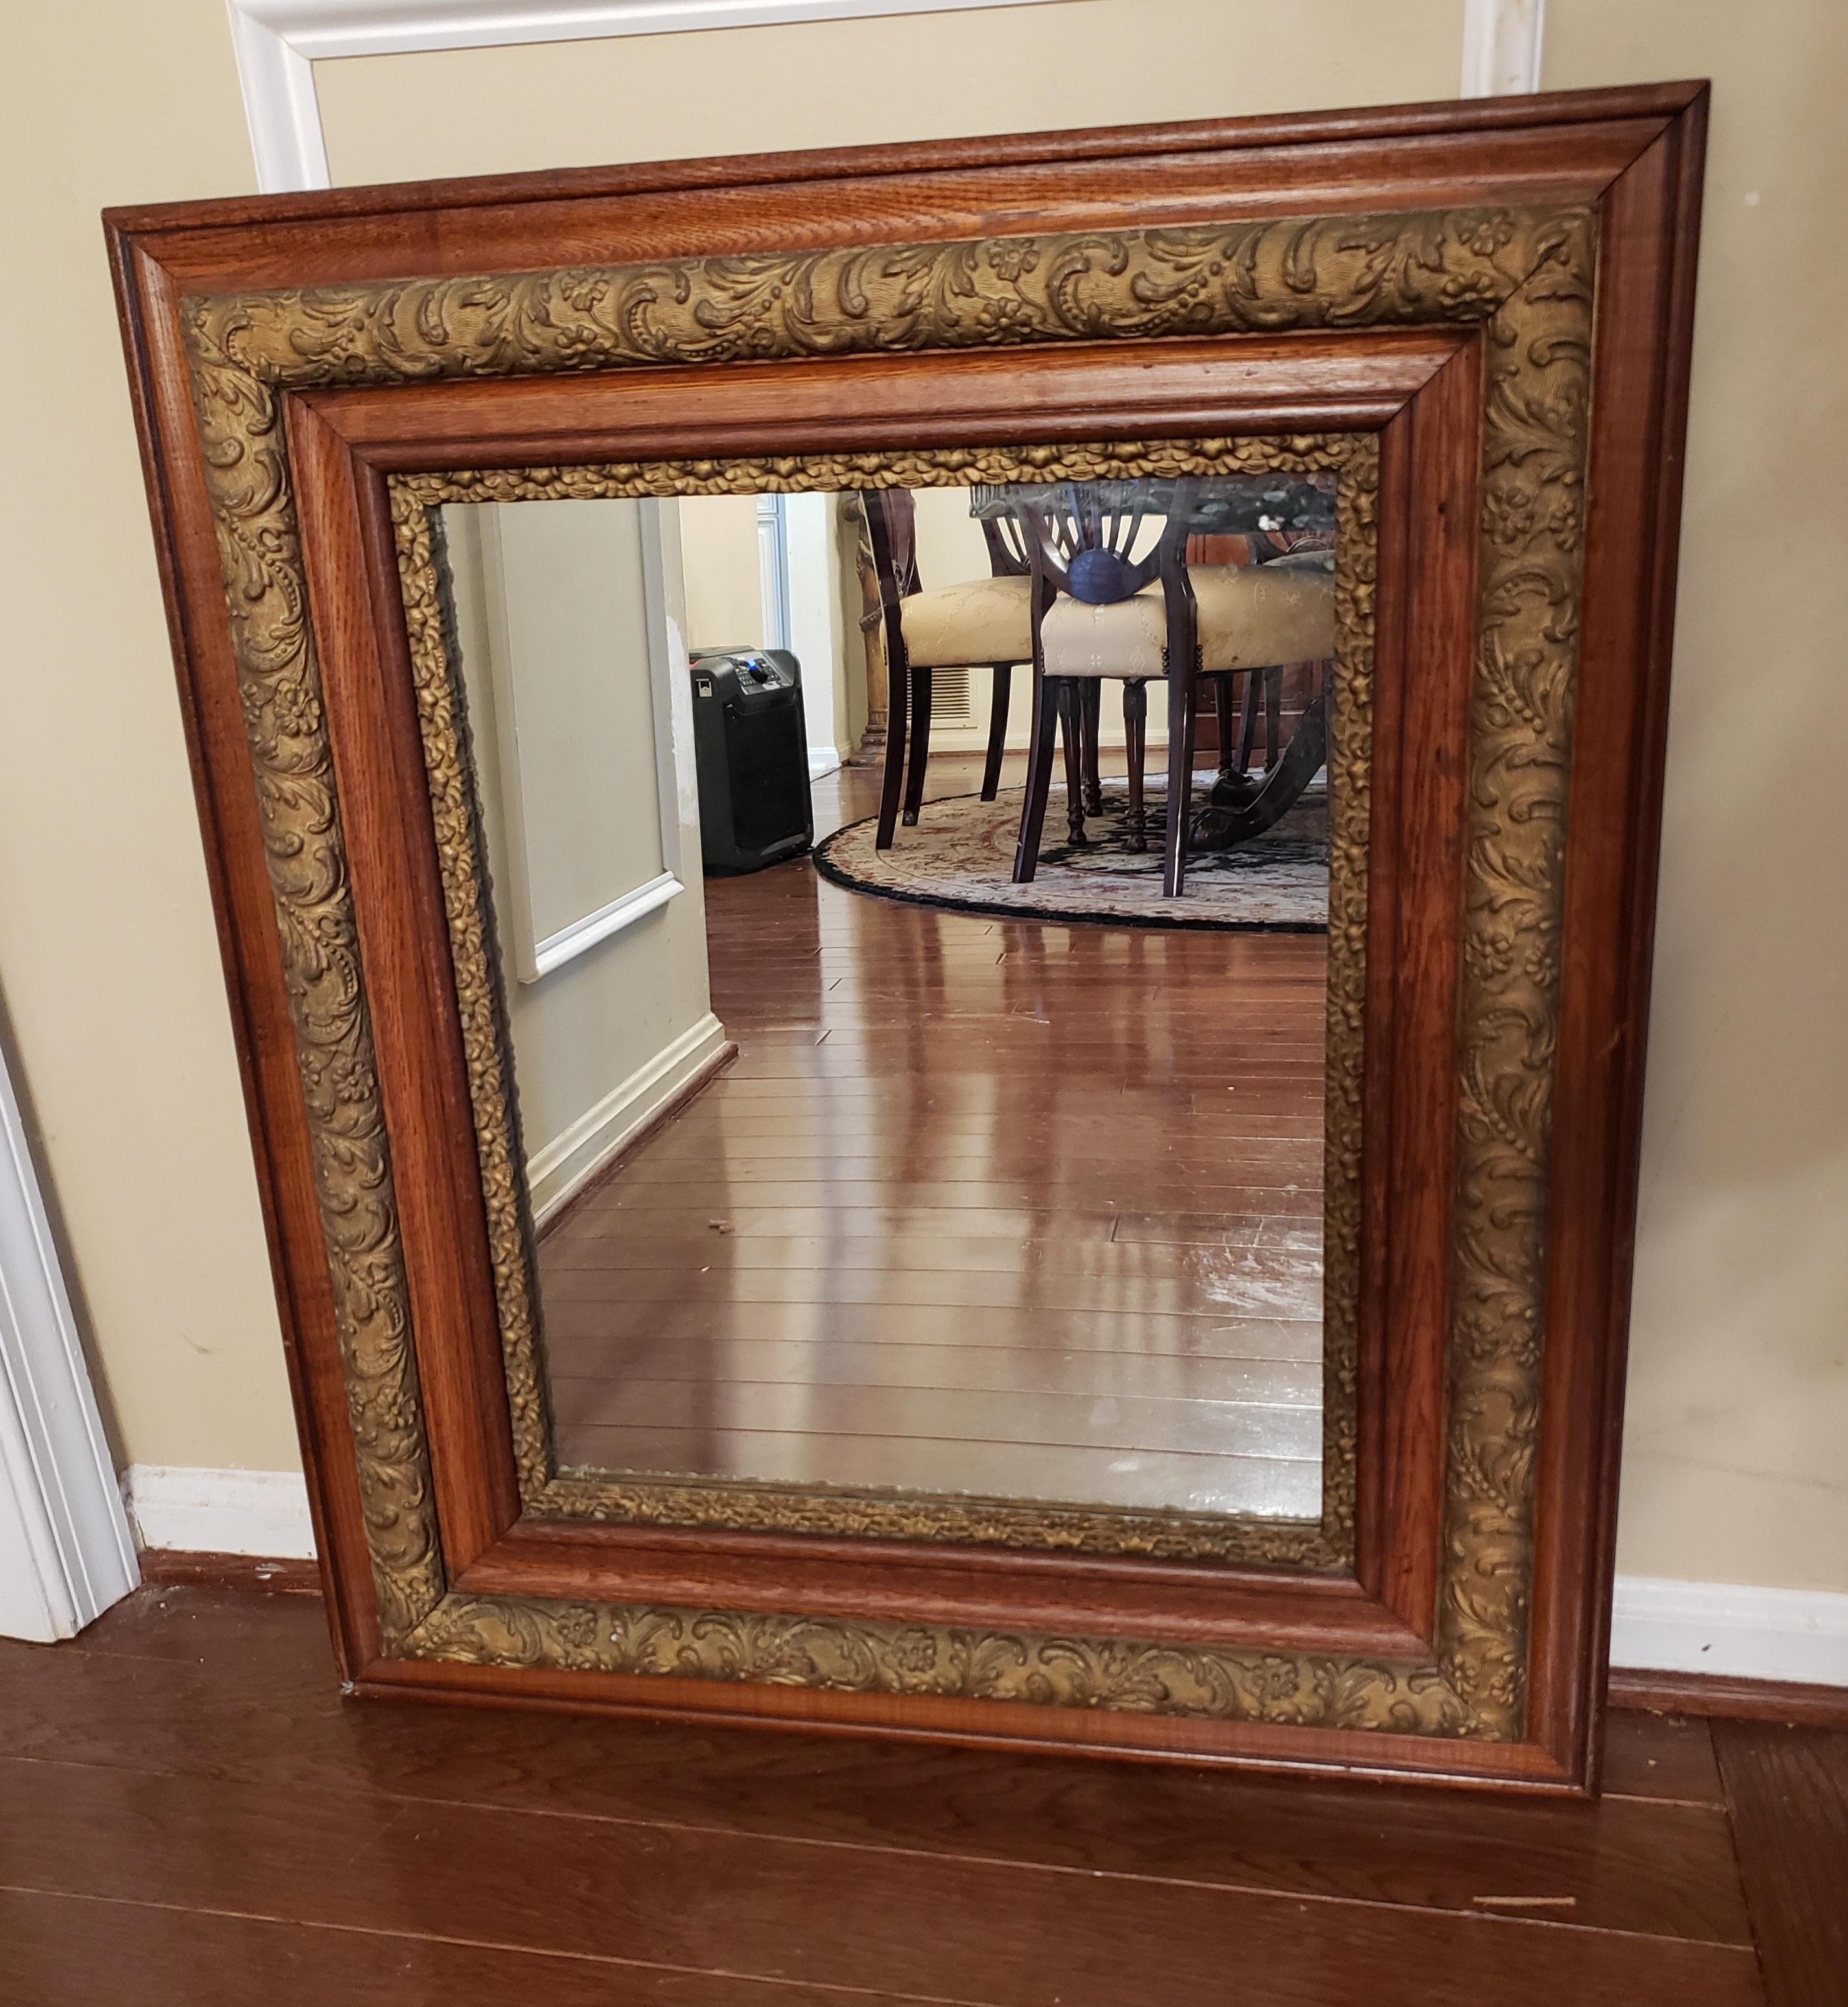 Beautiful Decorative Antique Victorian oak and gilt mirror. Features a double solid oak Frame. Frames are separated by exquisite, thick gilt work with raised floral decor throughout. Very good condition. Circa1890s

Measures 26.25